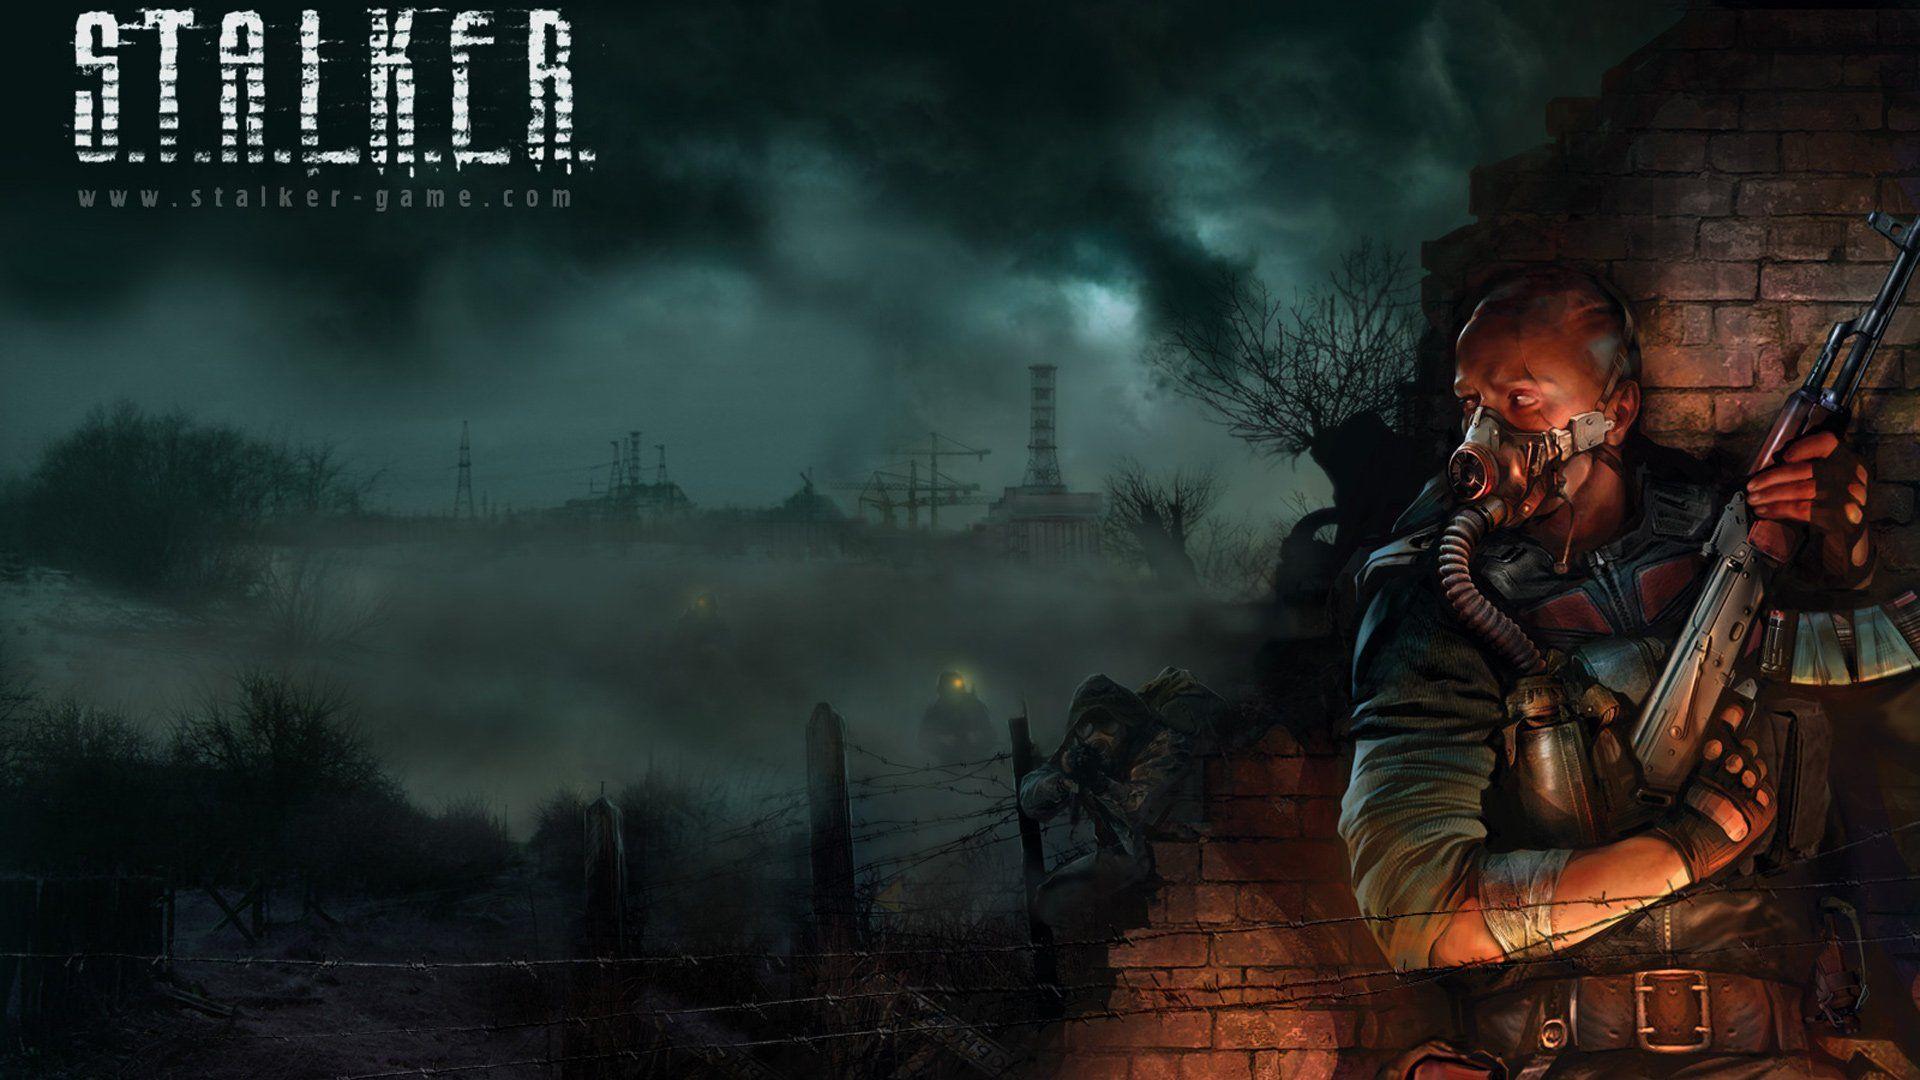 Stalker 2 Time To Go Home Wallpaper,HD Games Wallpapers,4k  Wallpapers,Images,Backgrounds,Photos and Pictures